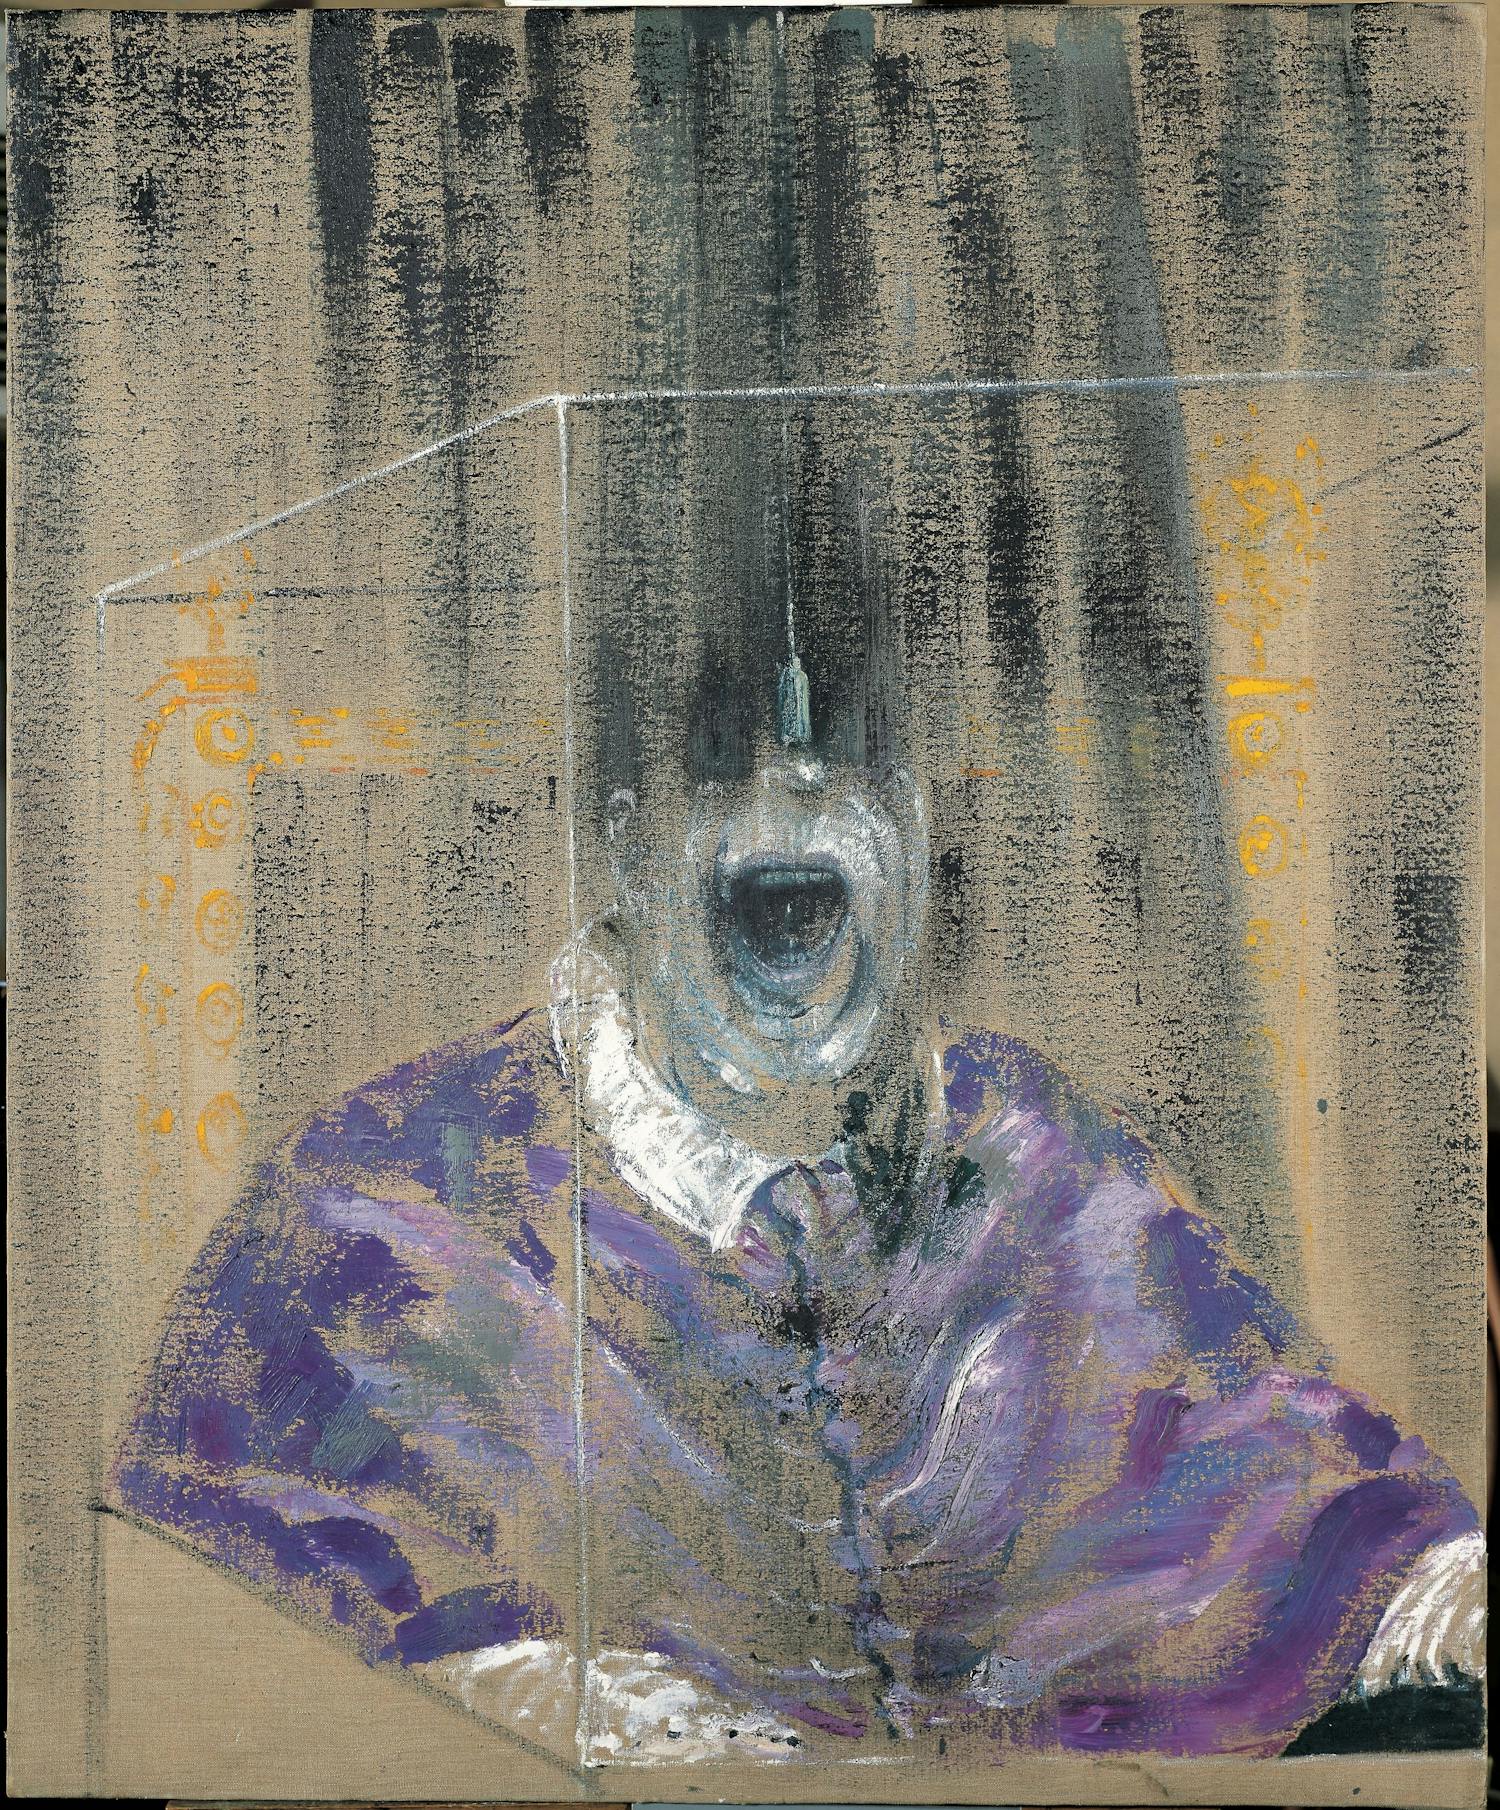 [ID: The image shows a painting of the distorted bust of a man in a purple coat. His mouth is open and his eyes and the top of his head are faded out into black lines. He is surrounded by the white outlines of a cube. To his left and right yellow forms are arranged in horizontal and vertical lines. End of ID]